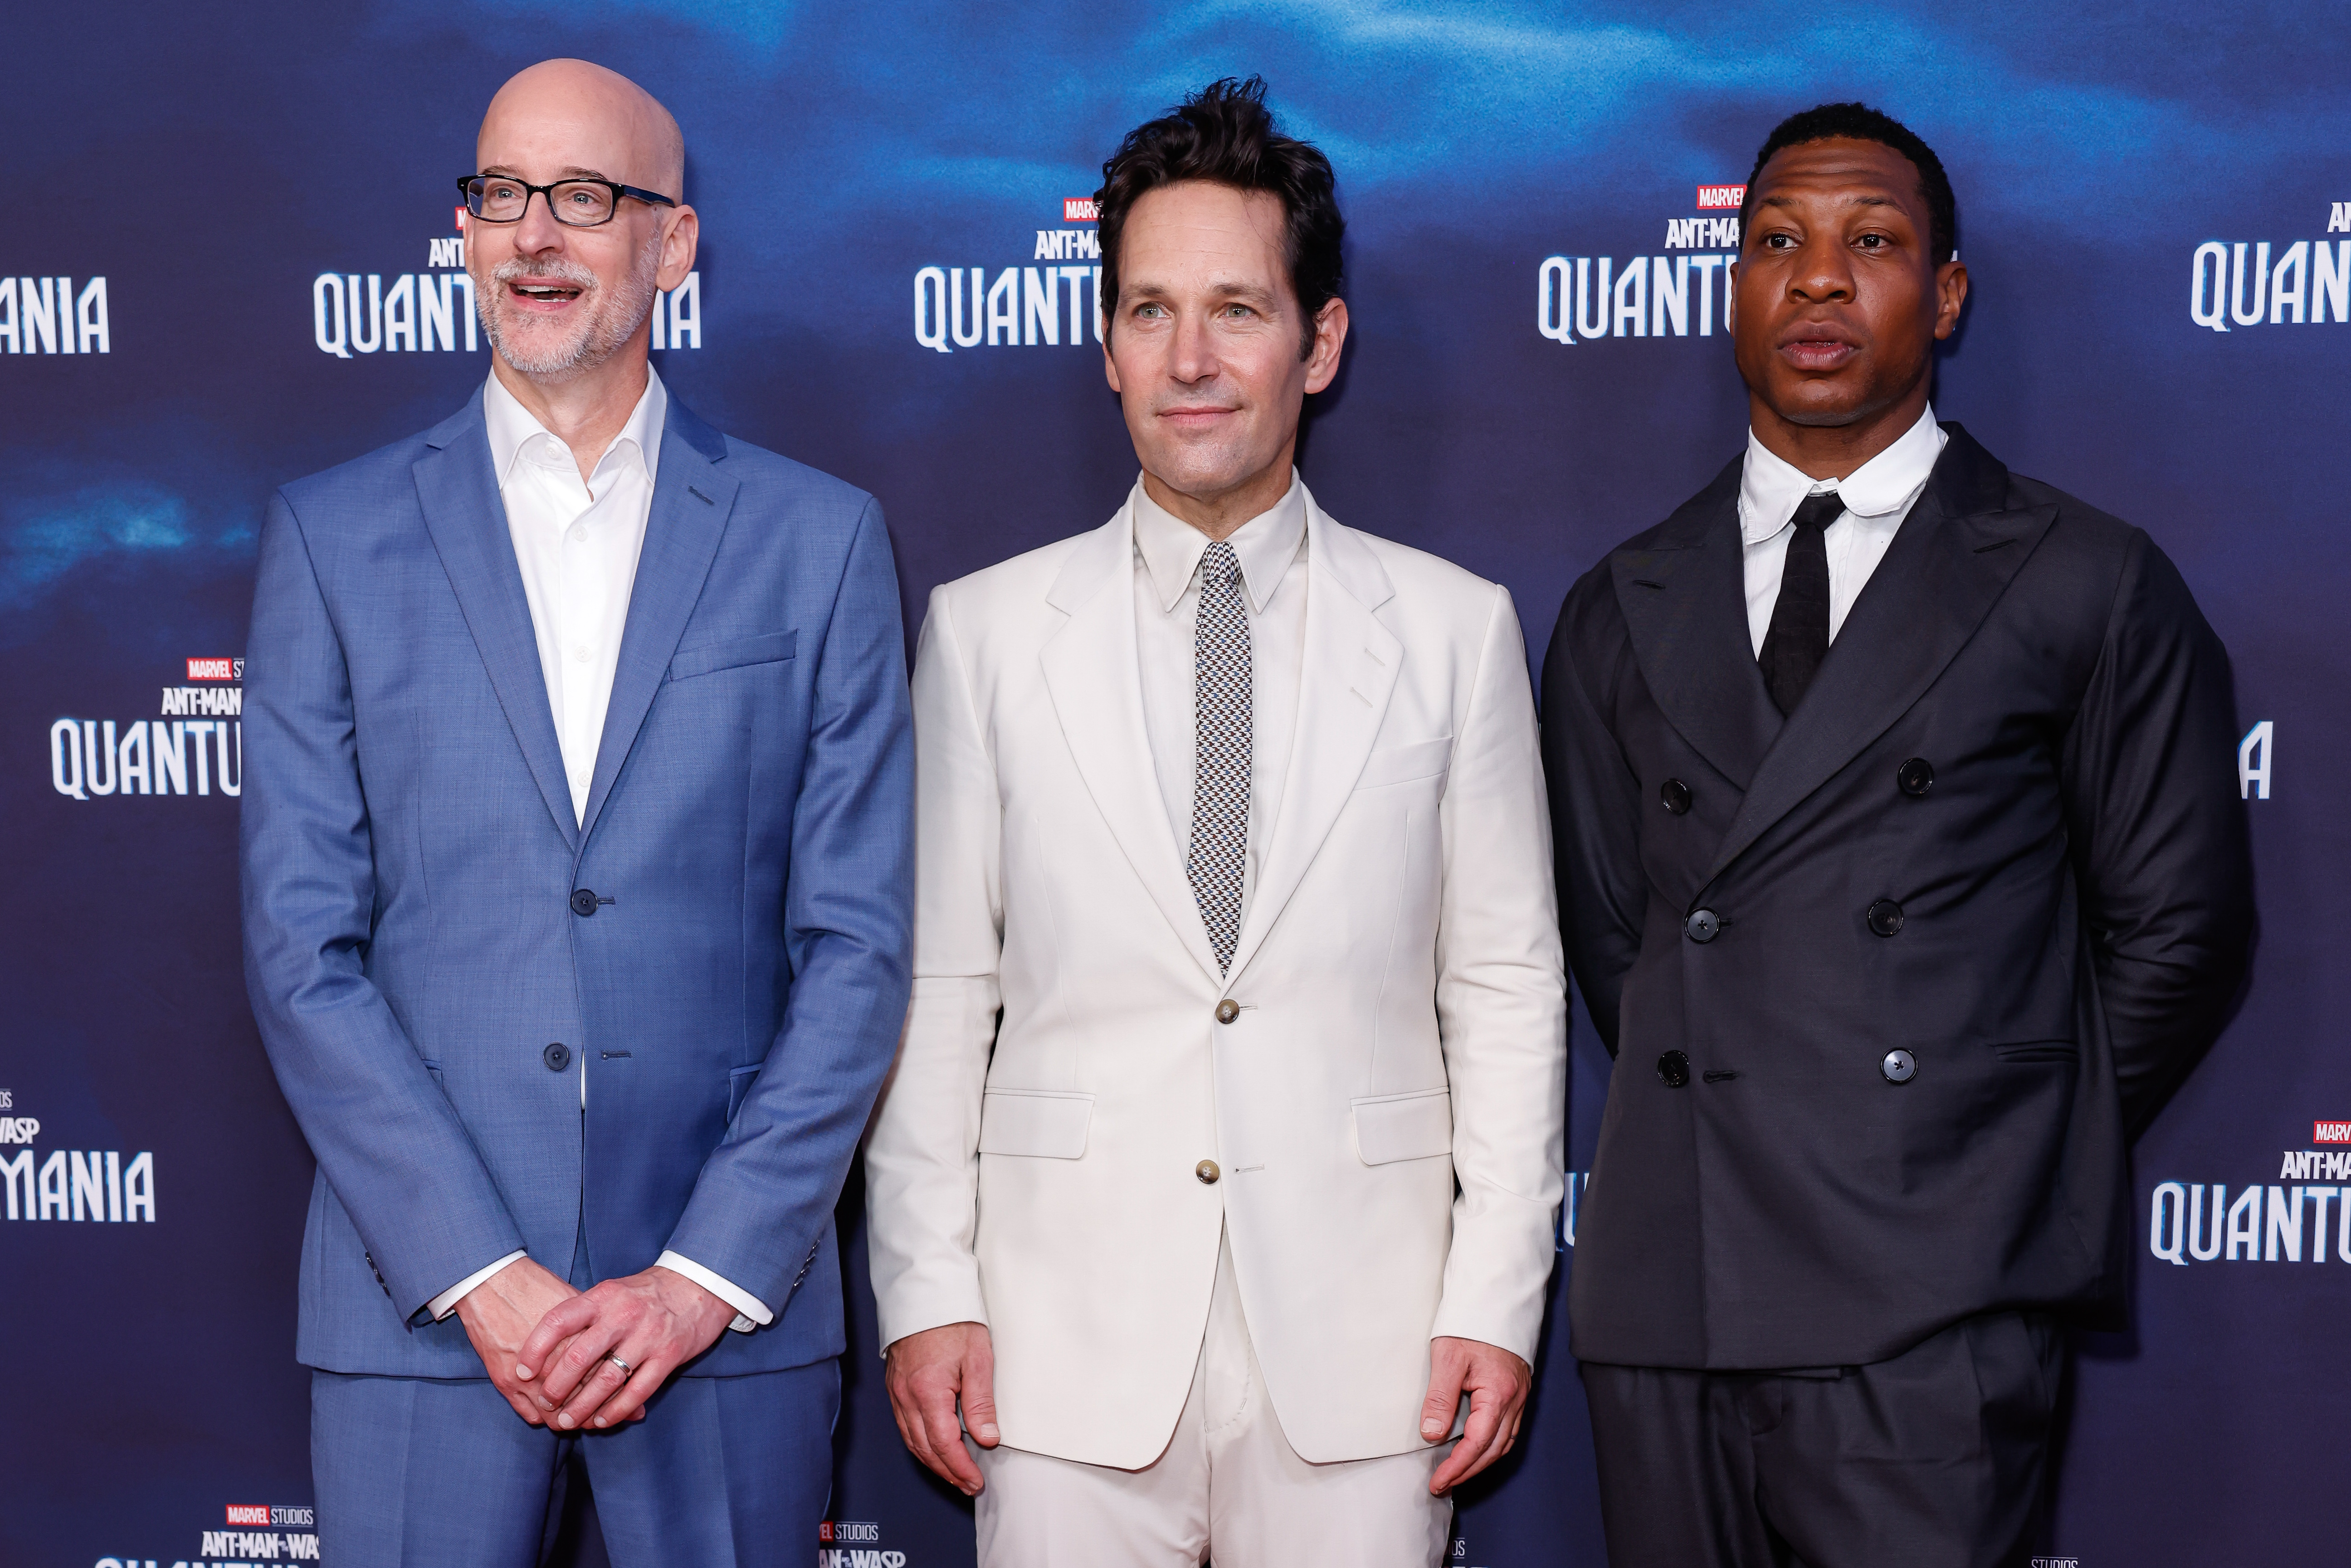 Peyton Reed, Paul Rudd, and Jonathan Majors attend the “Ant-Man and The Wasp: Quantumania” Sydney premiere at Hoyts Entertainment Quarter on February 02, 2023 in Sydney, Australia.